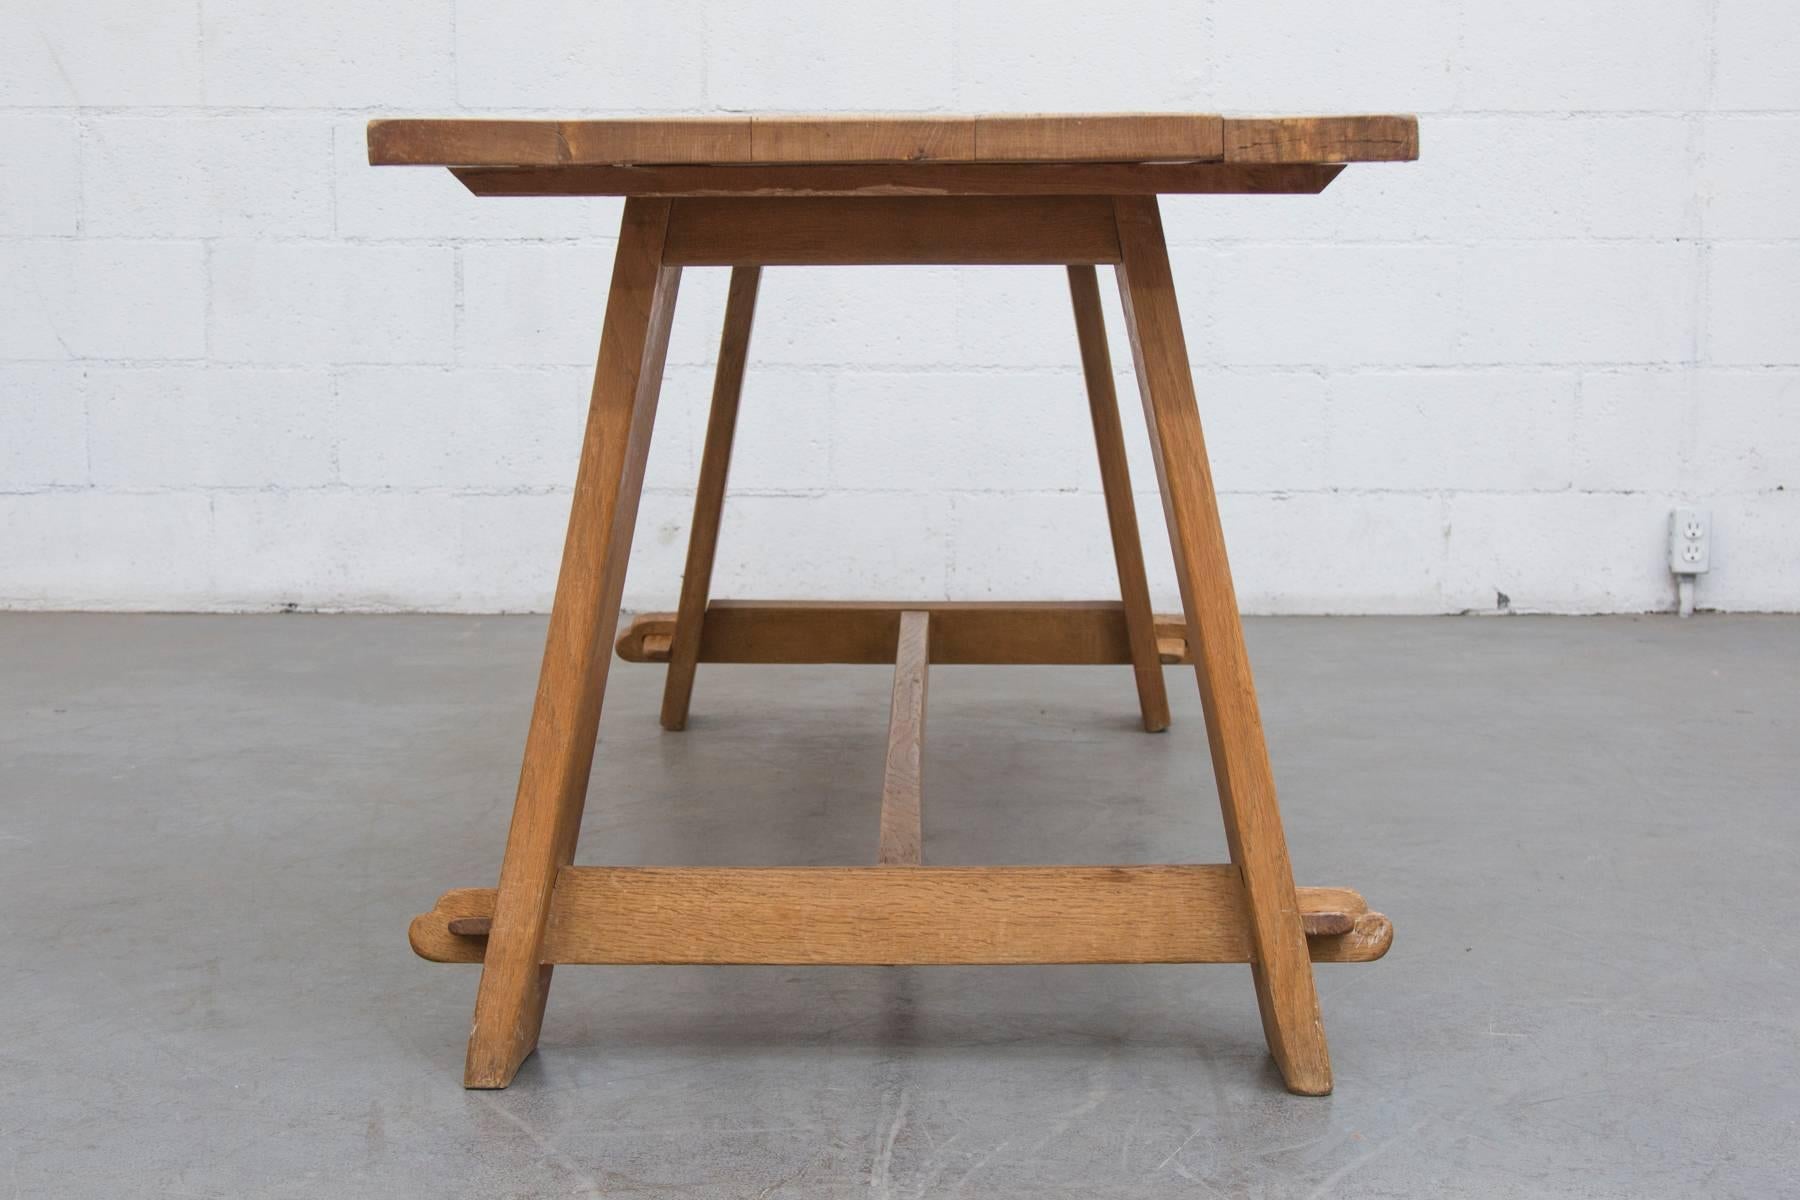 Amazingly simple solid oak trestle dining table constructed with tension pegs.
In original condition with visible wear consistent with its age and usage.